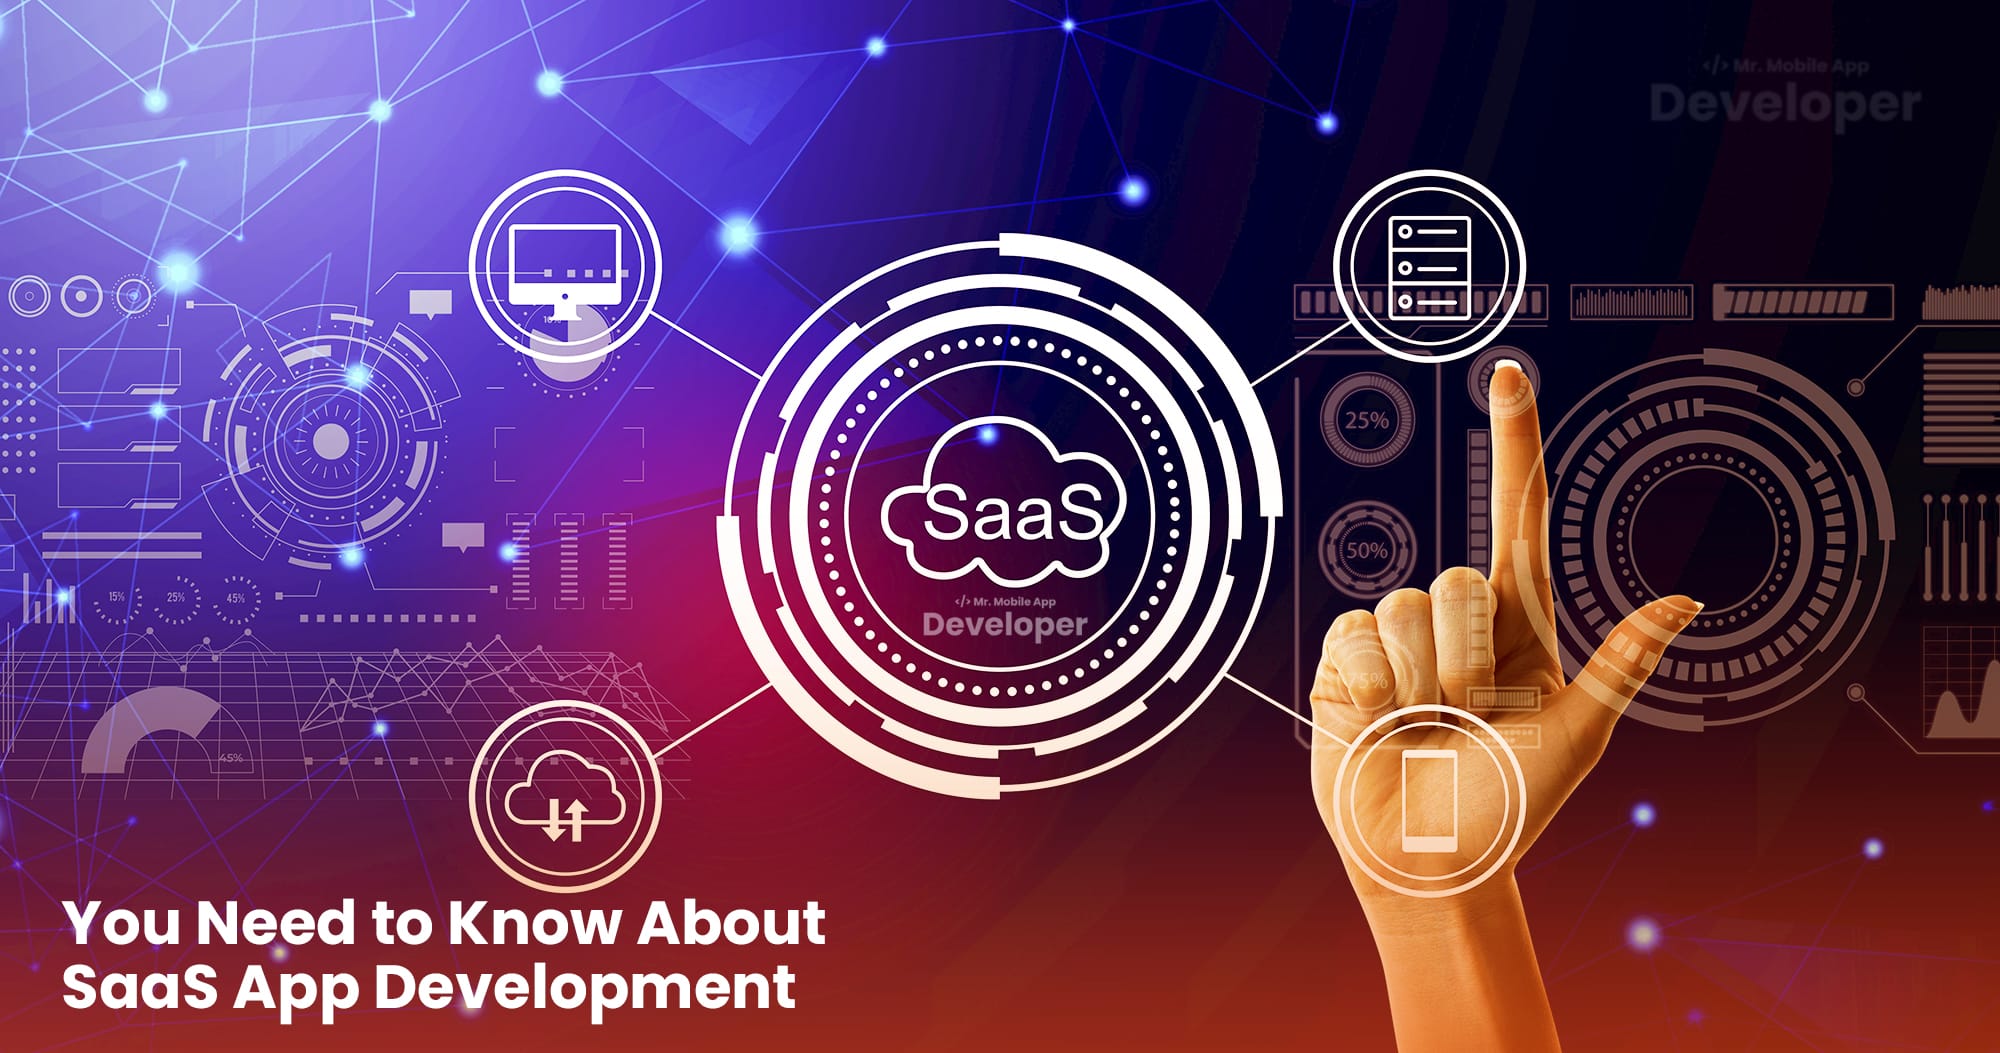 Everything You Need to Know About SaaS App Development